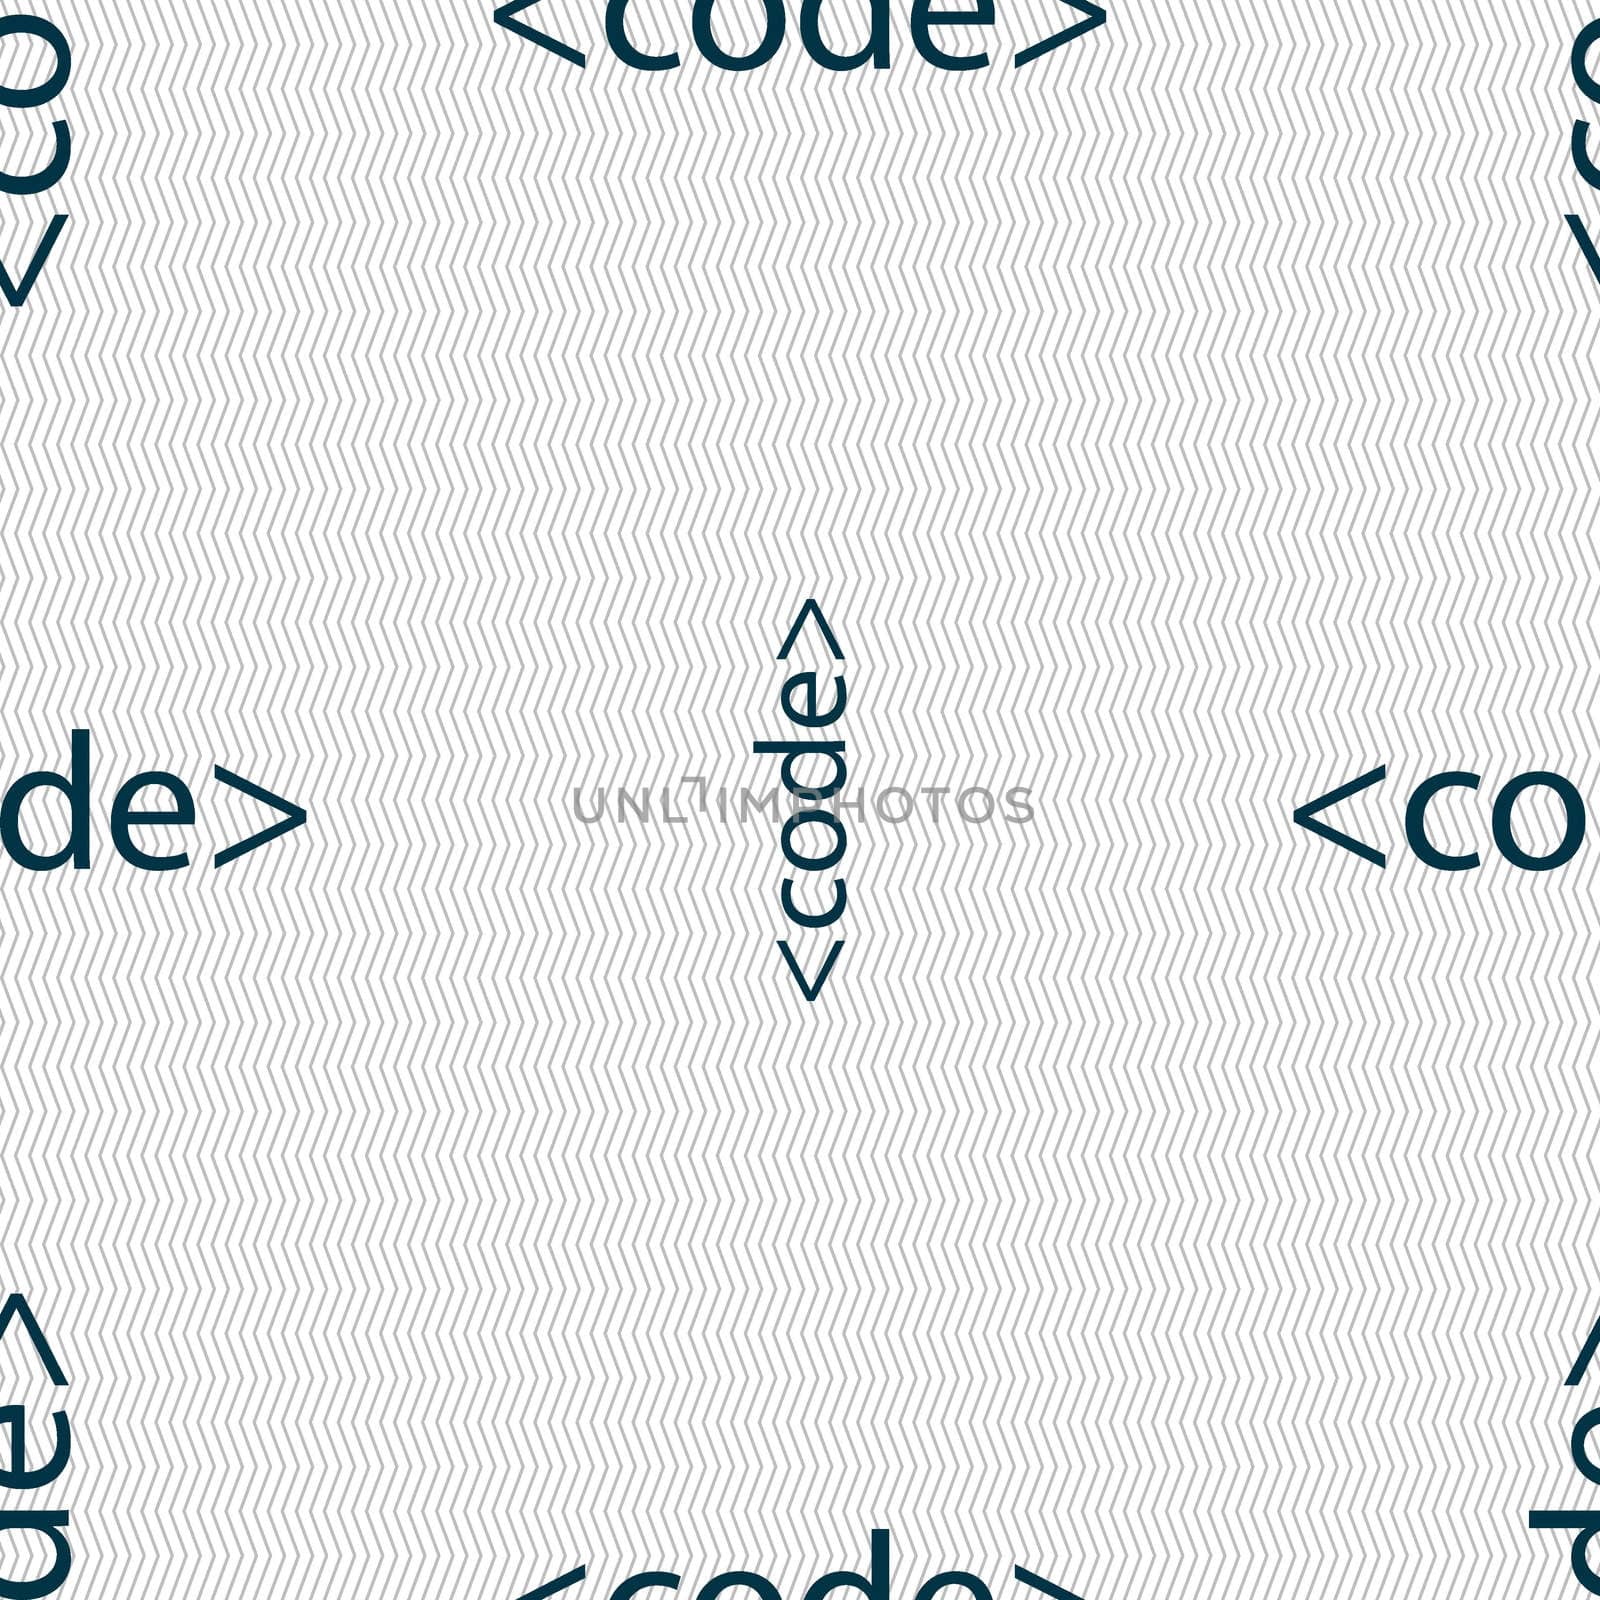 Code sign icon. Programming language symbol. Seamless abstract background with geometric shapes. illustration